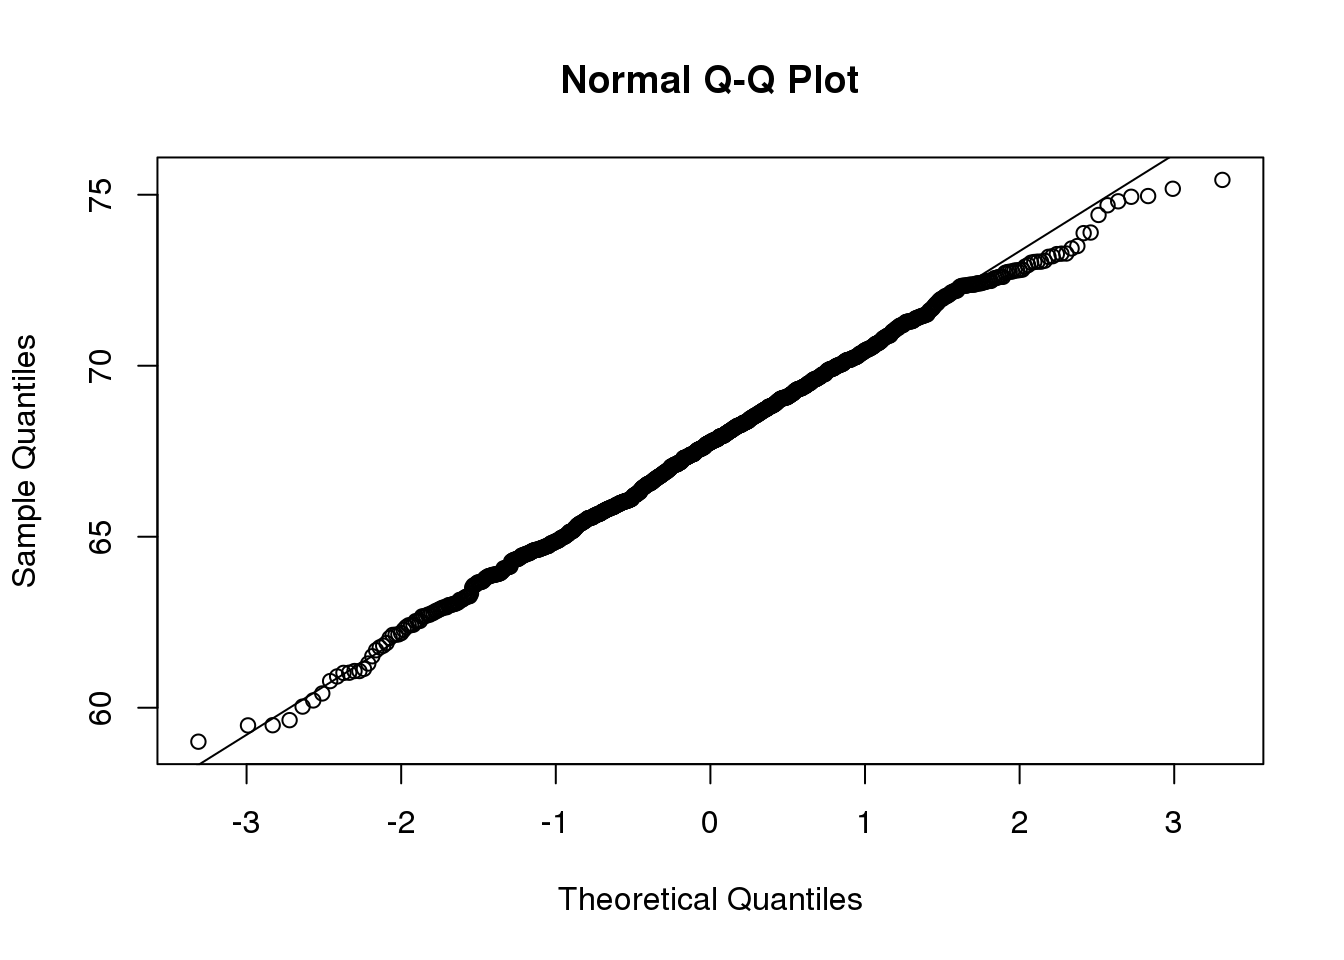 Second example of qqplot. Here we use the function qqnorm which computes the theoretical normal quantiles automatically.